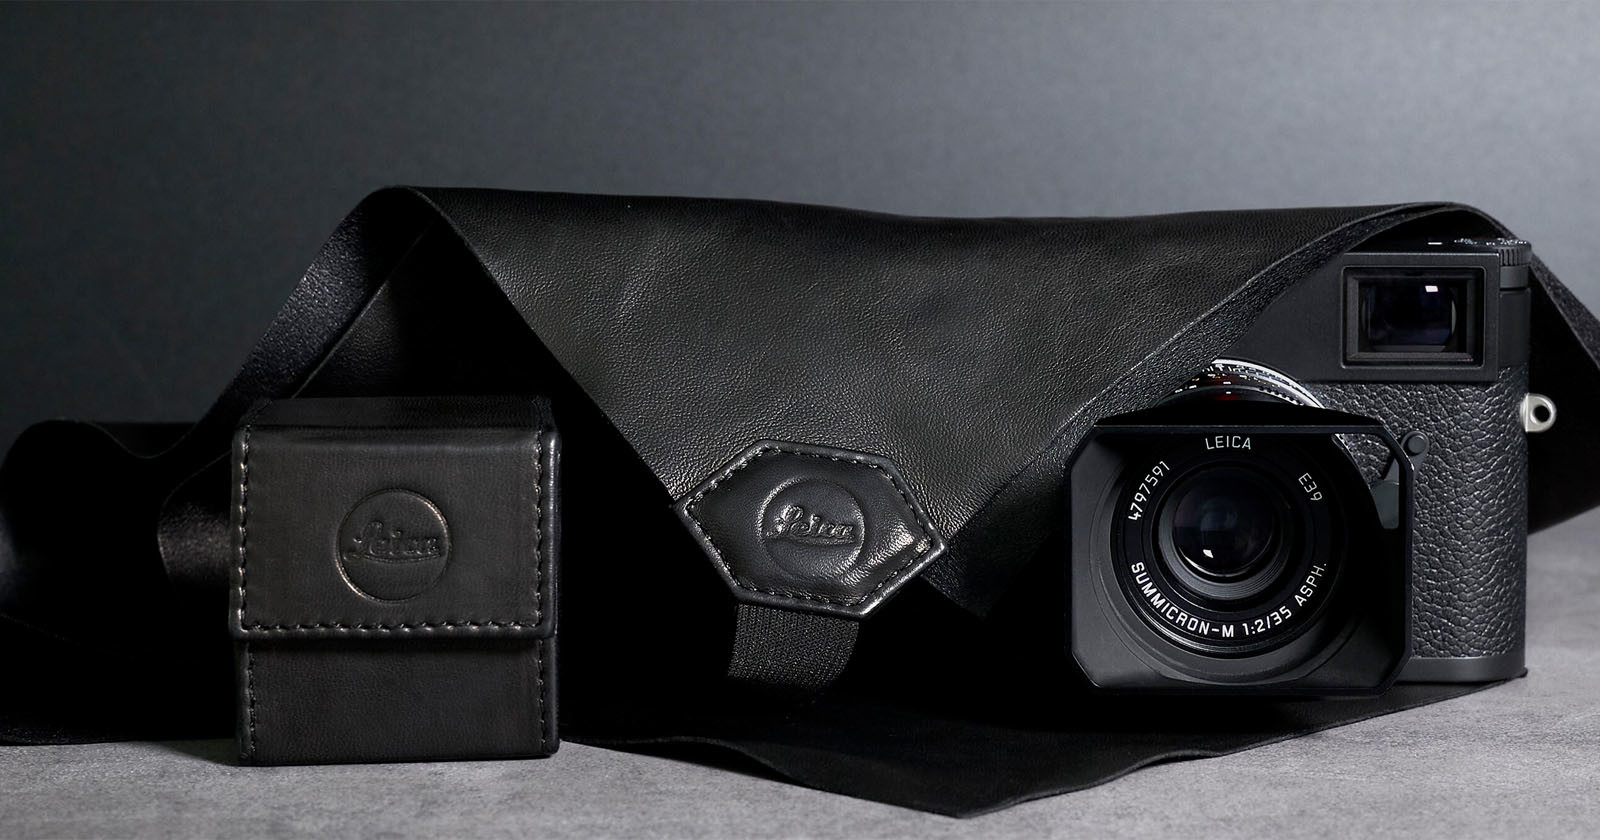  leica debuts 175 napa leather luxury camera wrapping 